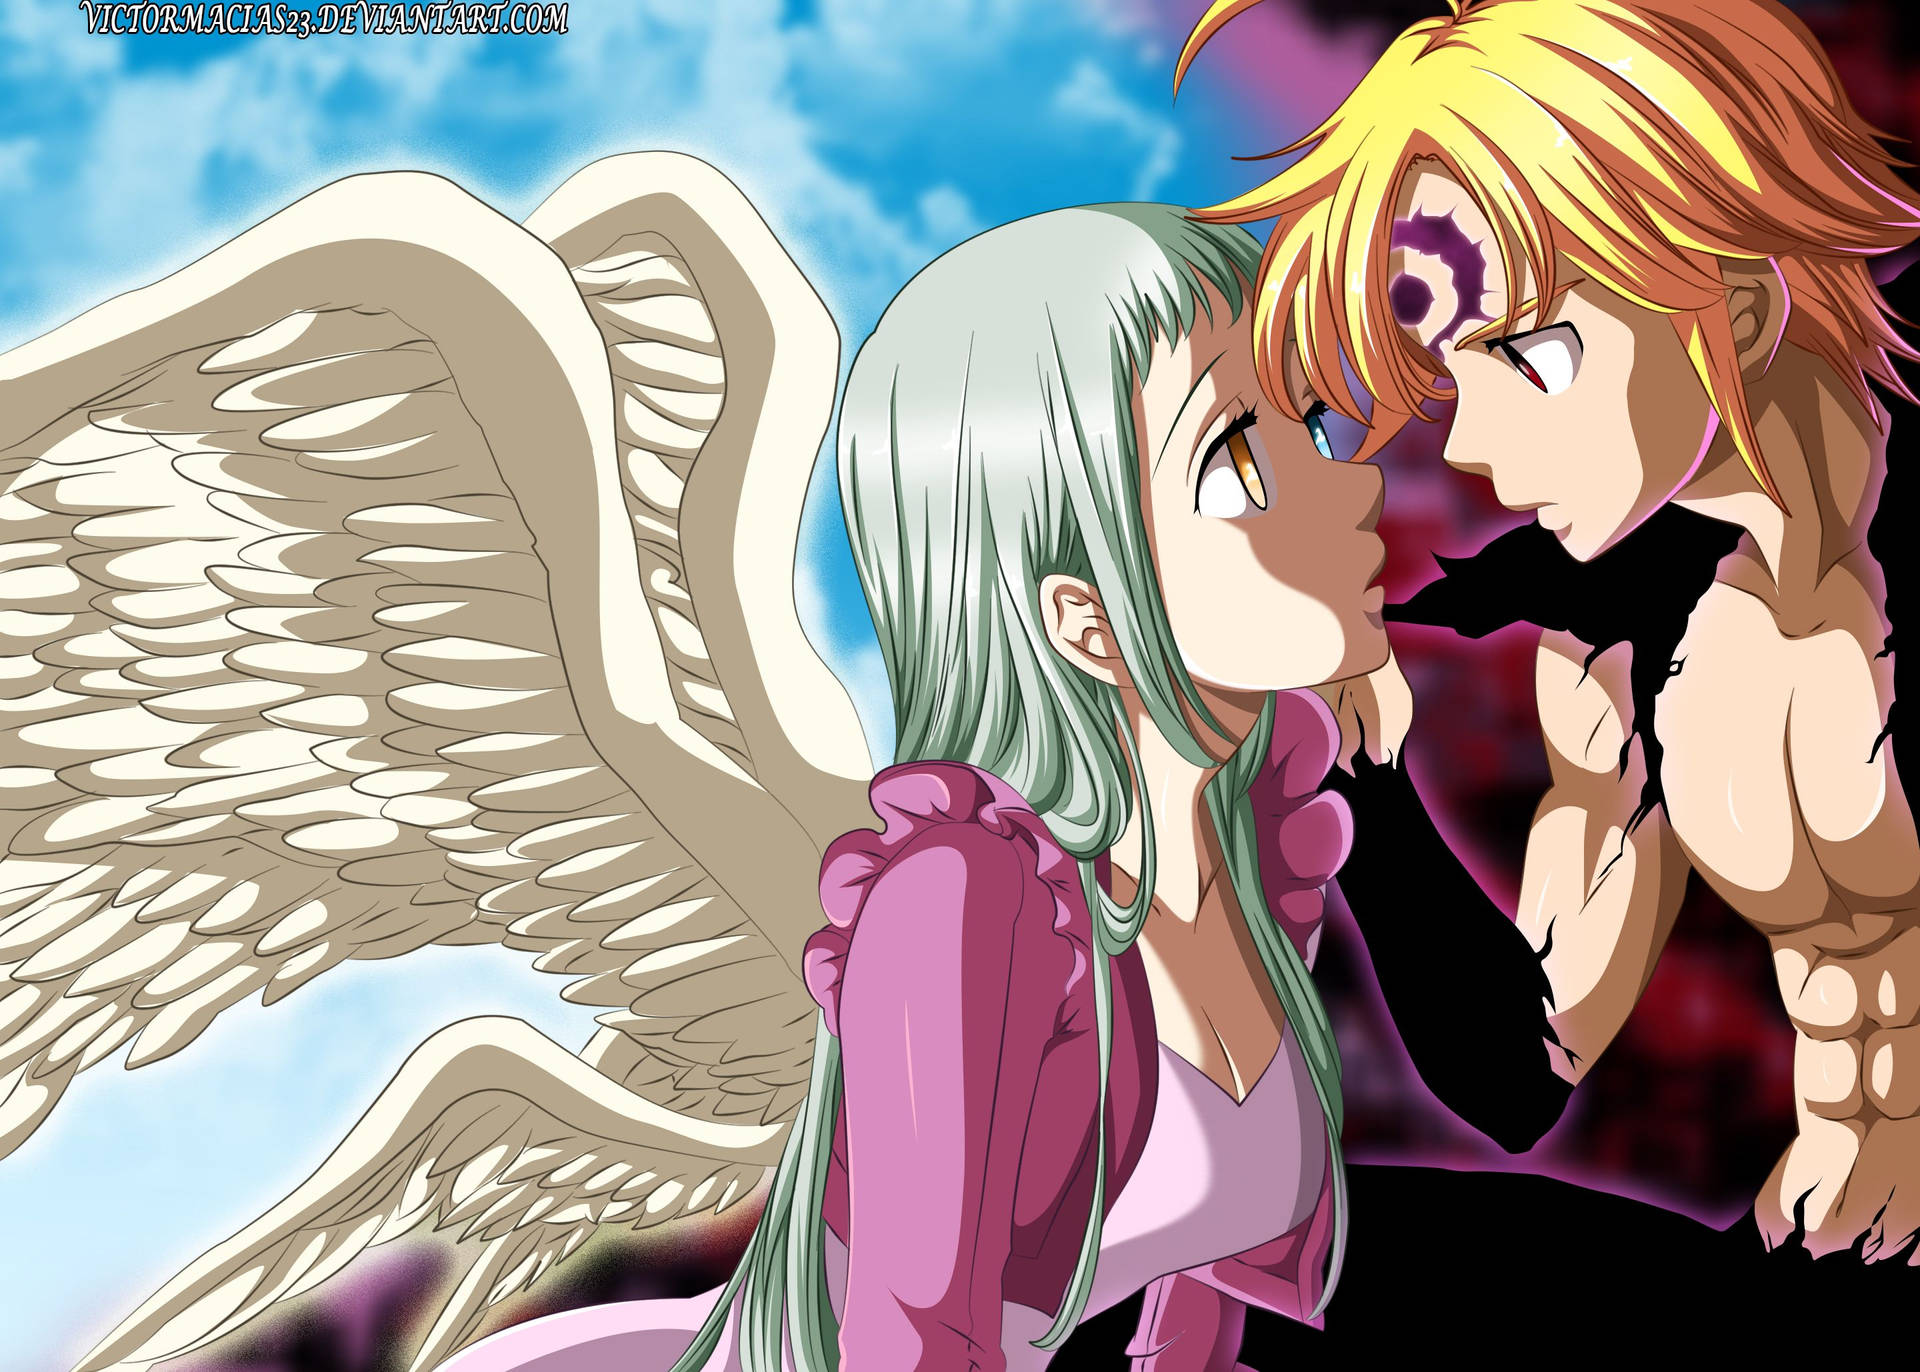 Meliodas and Elizabeth, the heroes of the Seven Deadly Sins Wallpaper